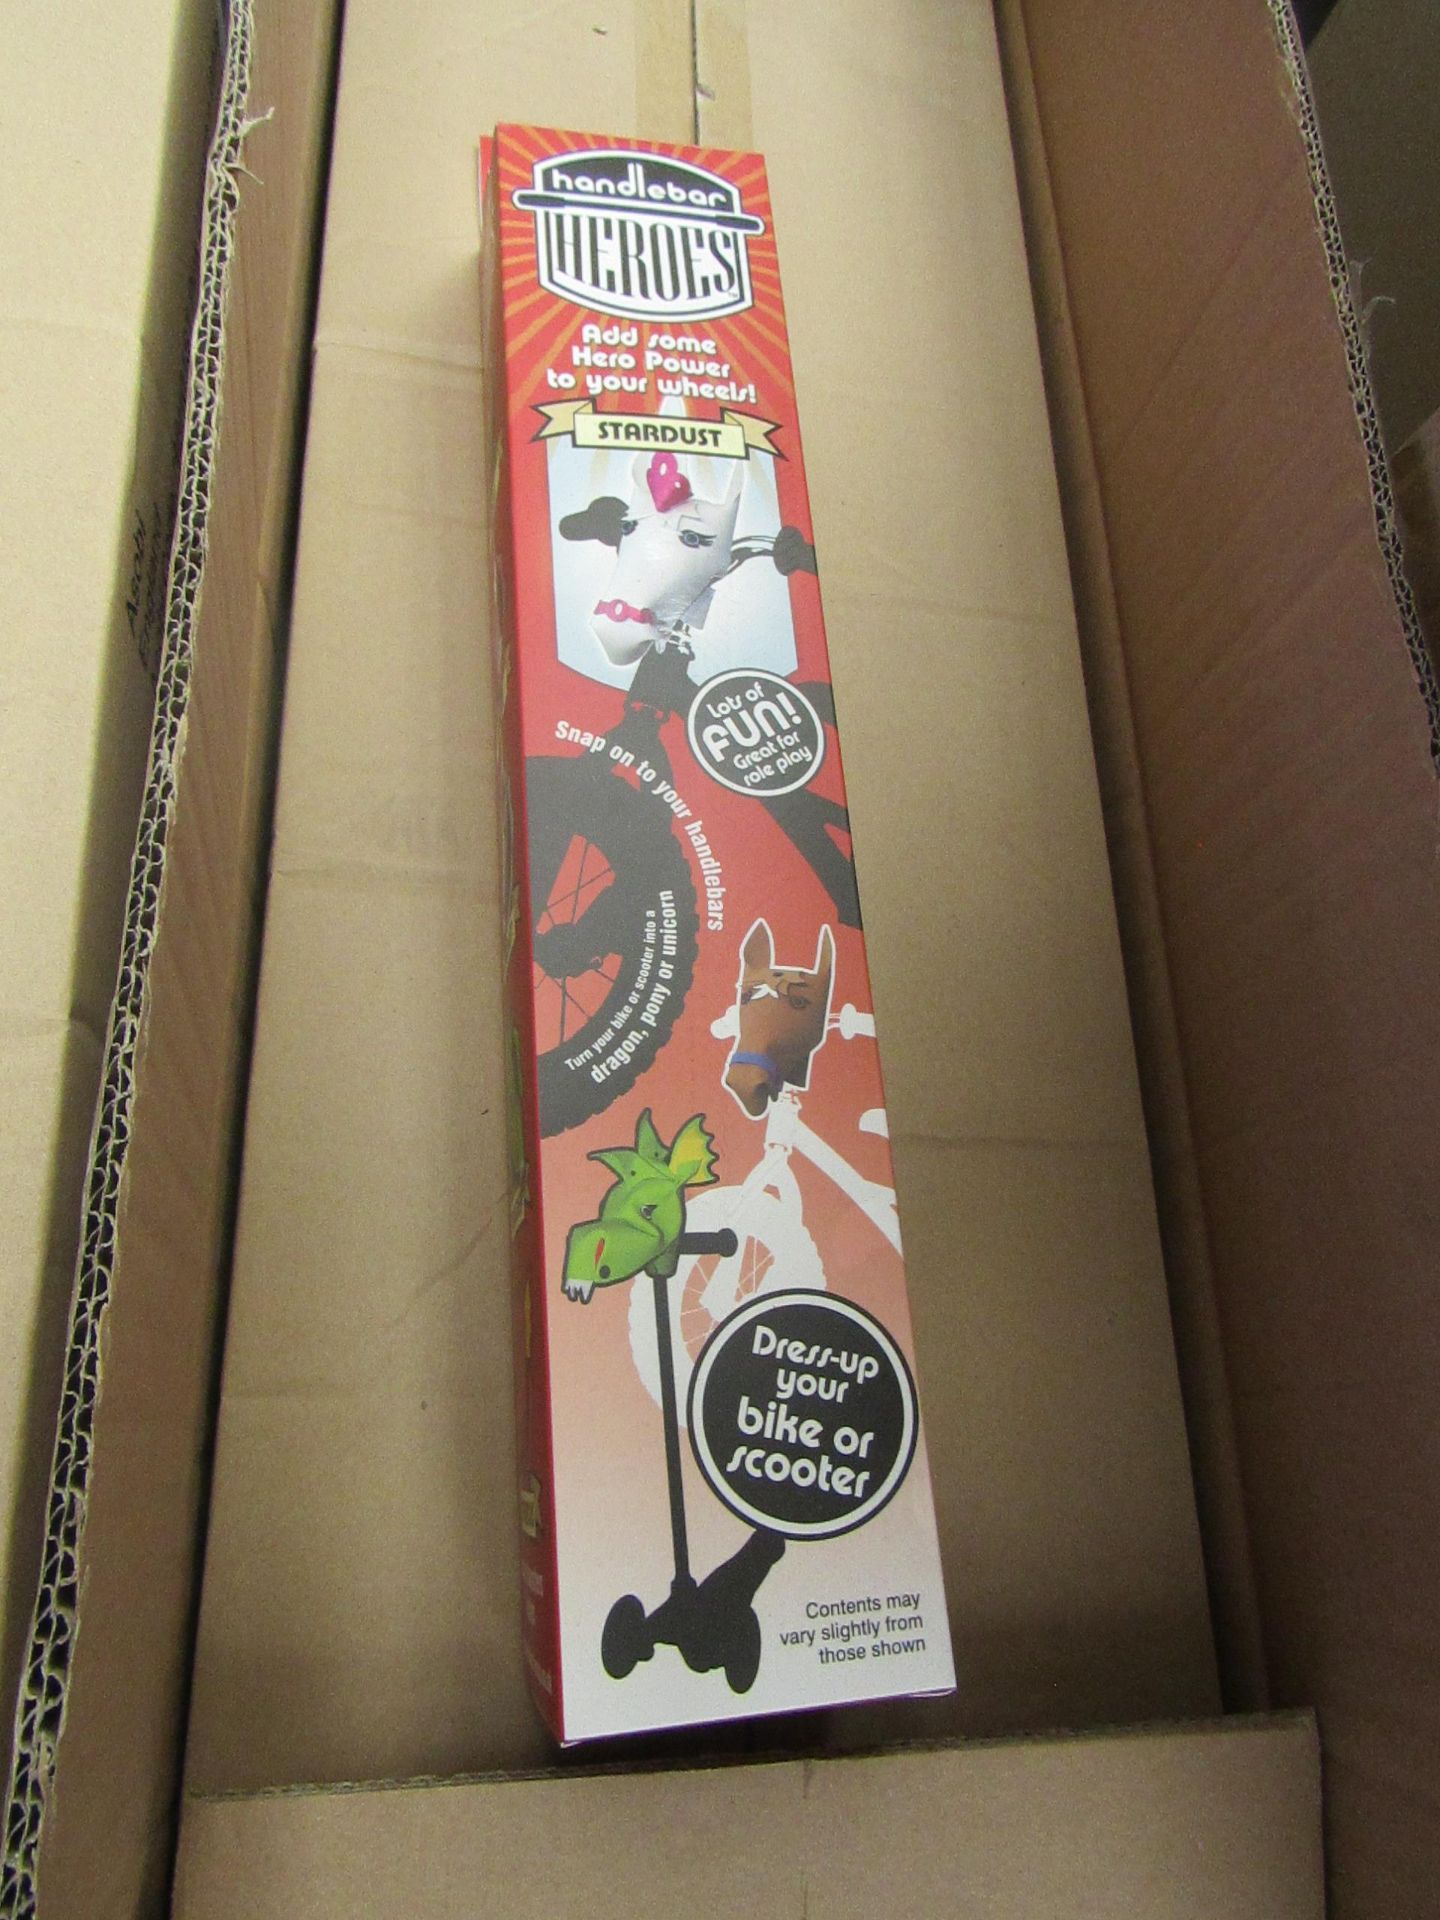 6x Handle Bar Heroes Stardust Bike/Scooter Accessory. New & Boxed.